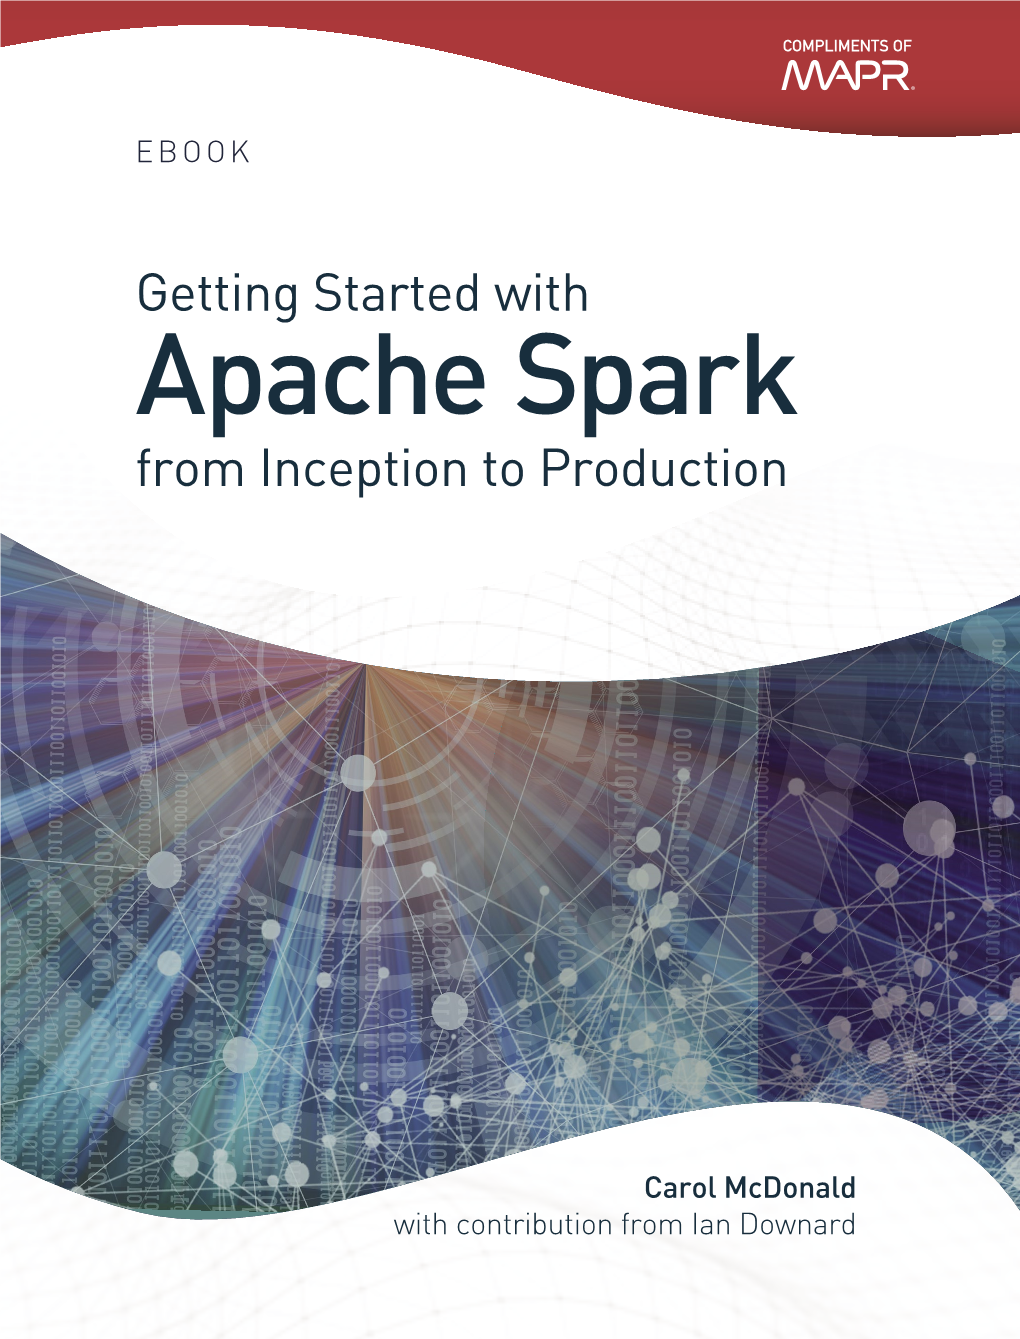 Apache Spark from Inception to Production